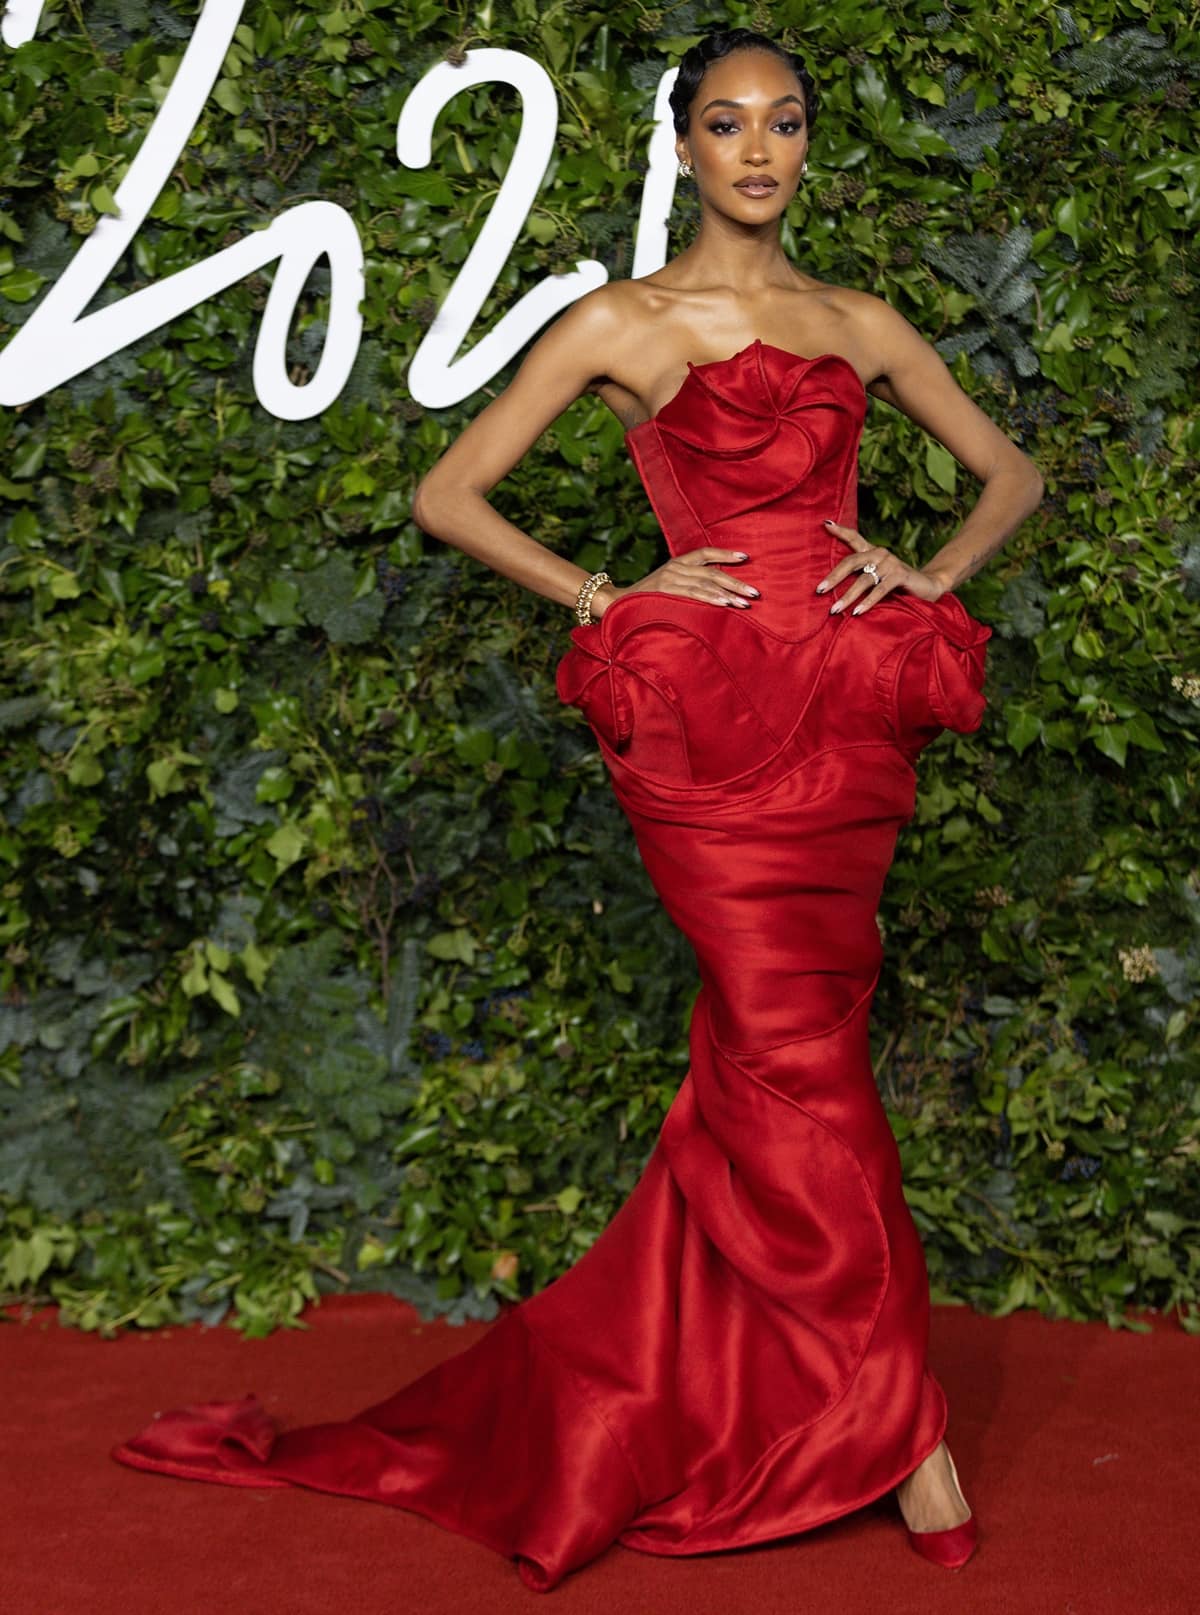 Jourdan Dunn in a red Andrea Brocca dress attends The Fashion Awards 2021